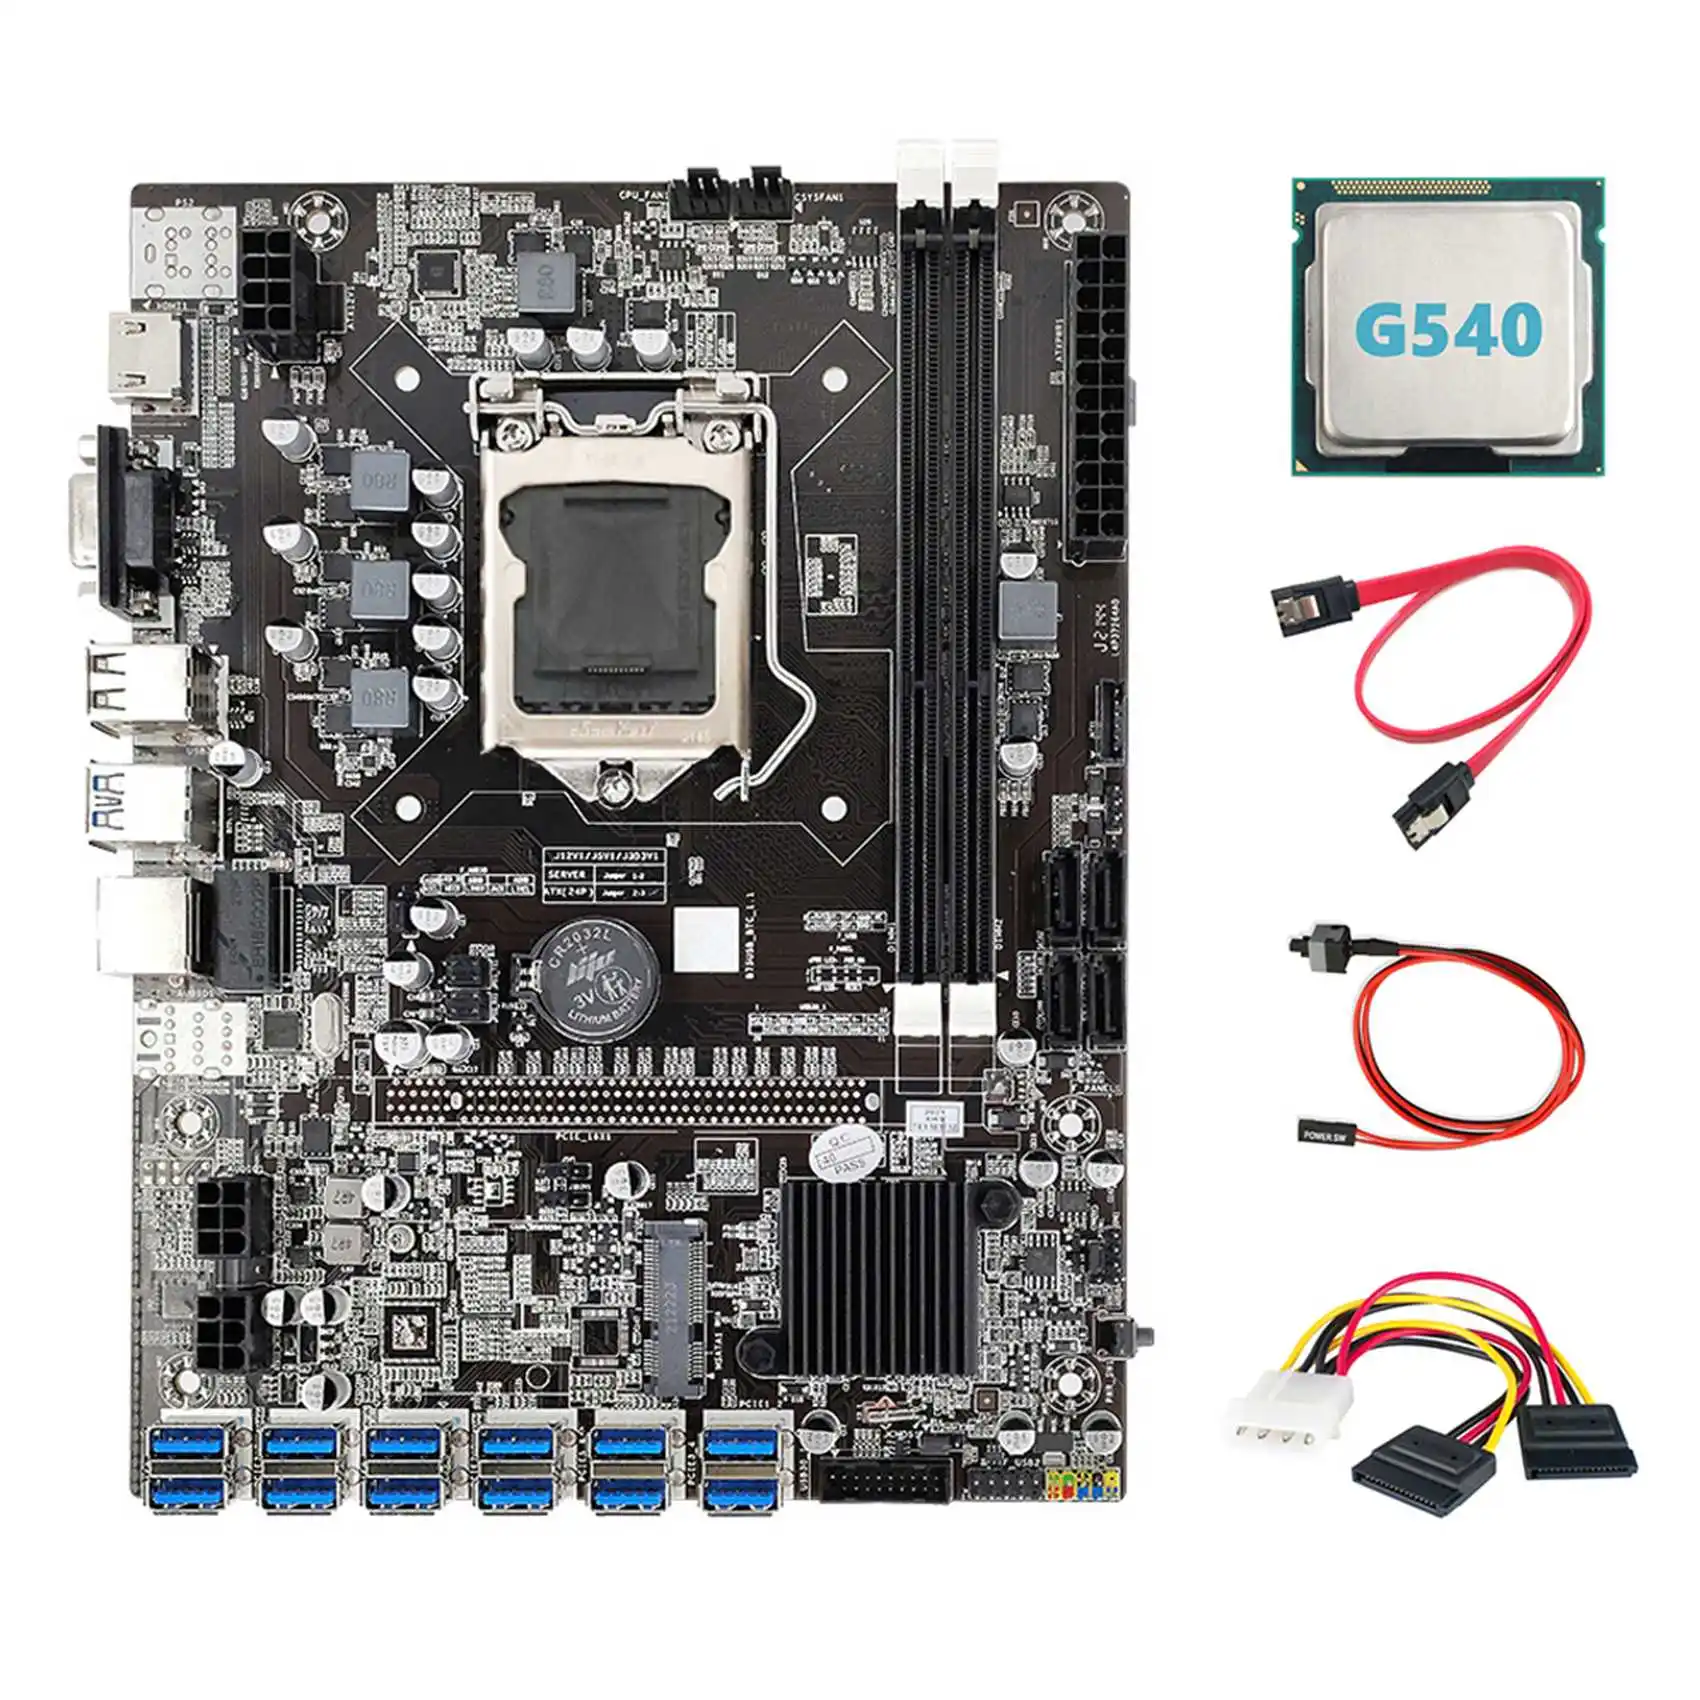 B75 ETH Miner Motherboard 12 PCIE to USB3.0+G540 CPU+4PIN to SATA Cable+SATA Cable+Switch Cable LGA1155 Motherboard